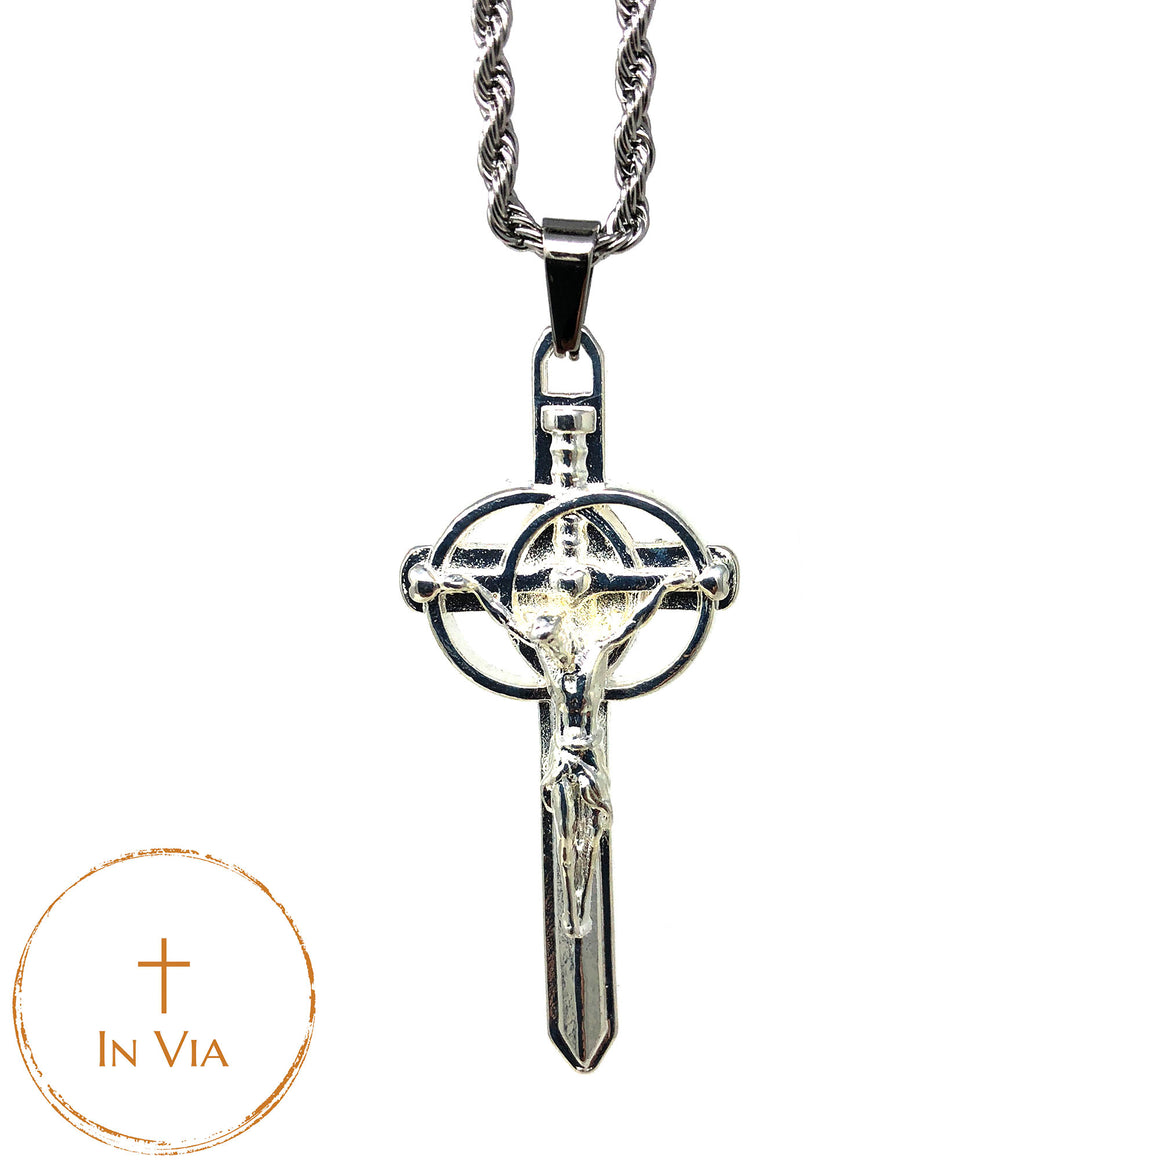 In Via Holy Matrimony Crucifix -Silver